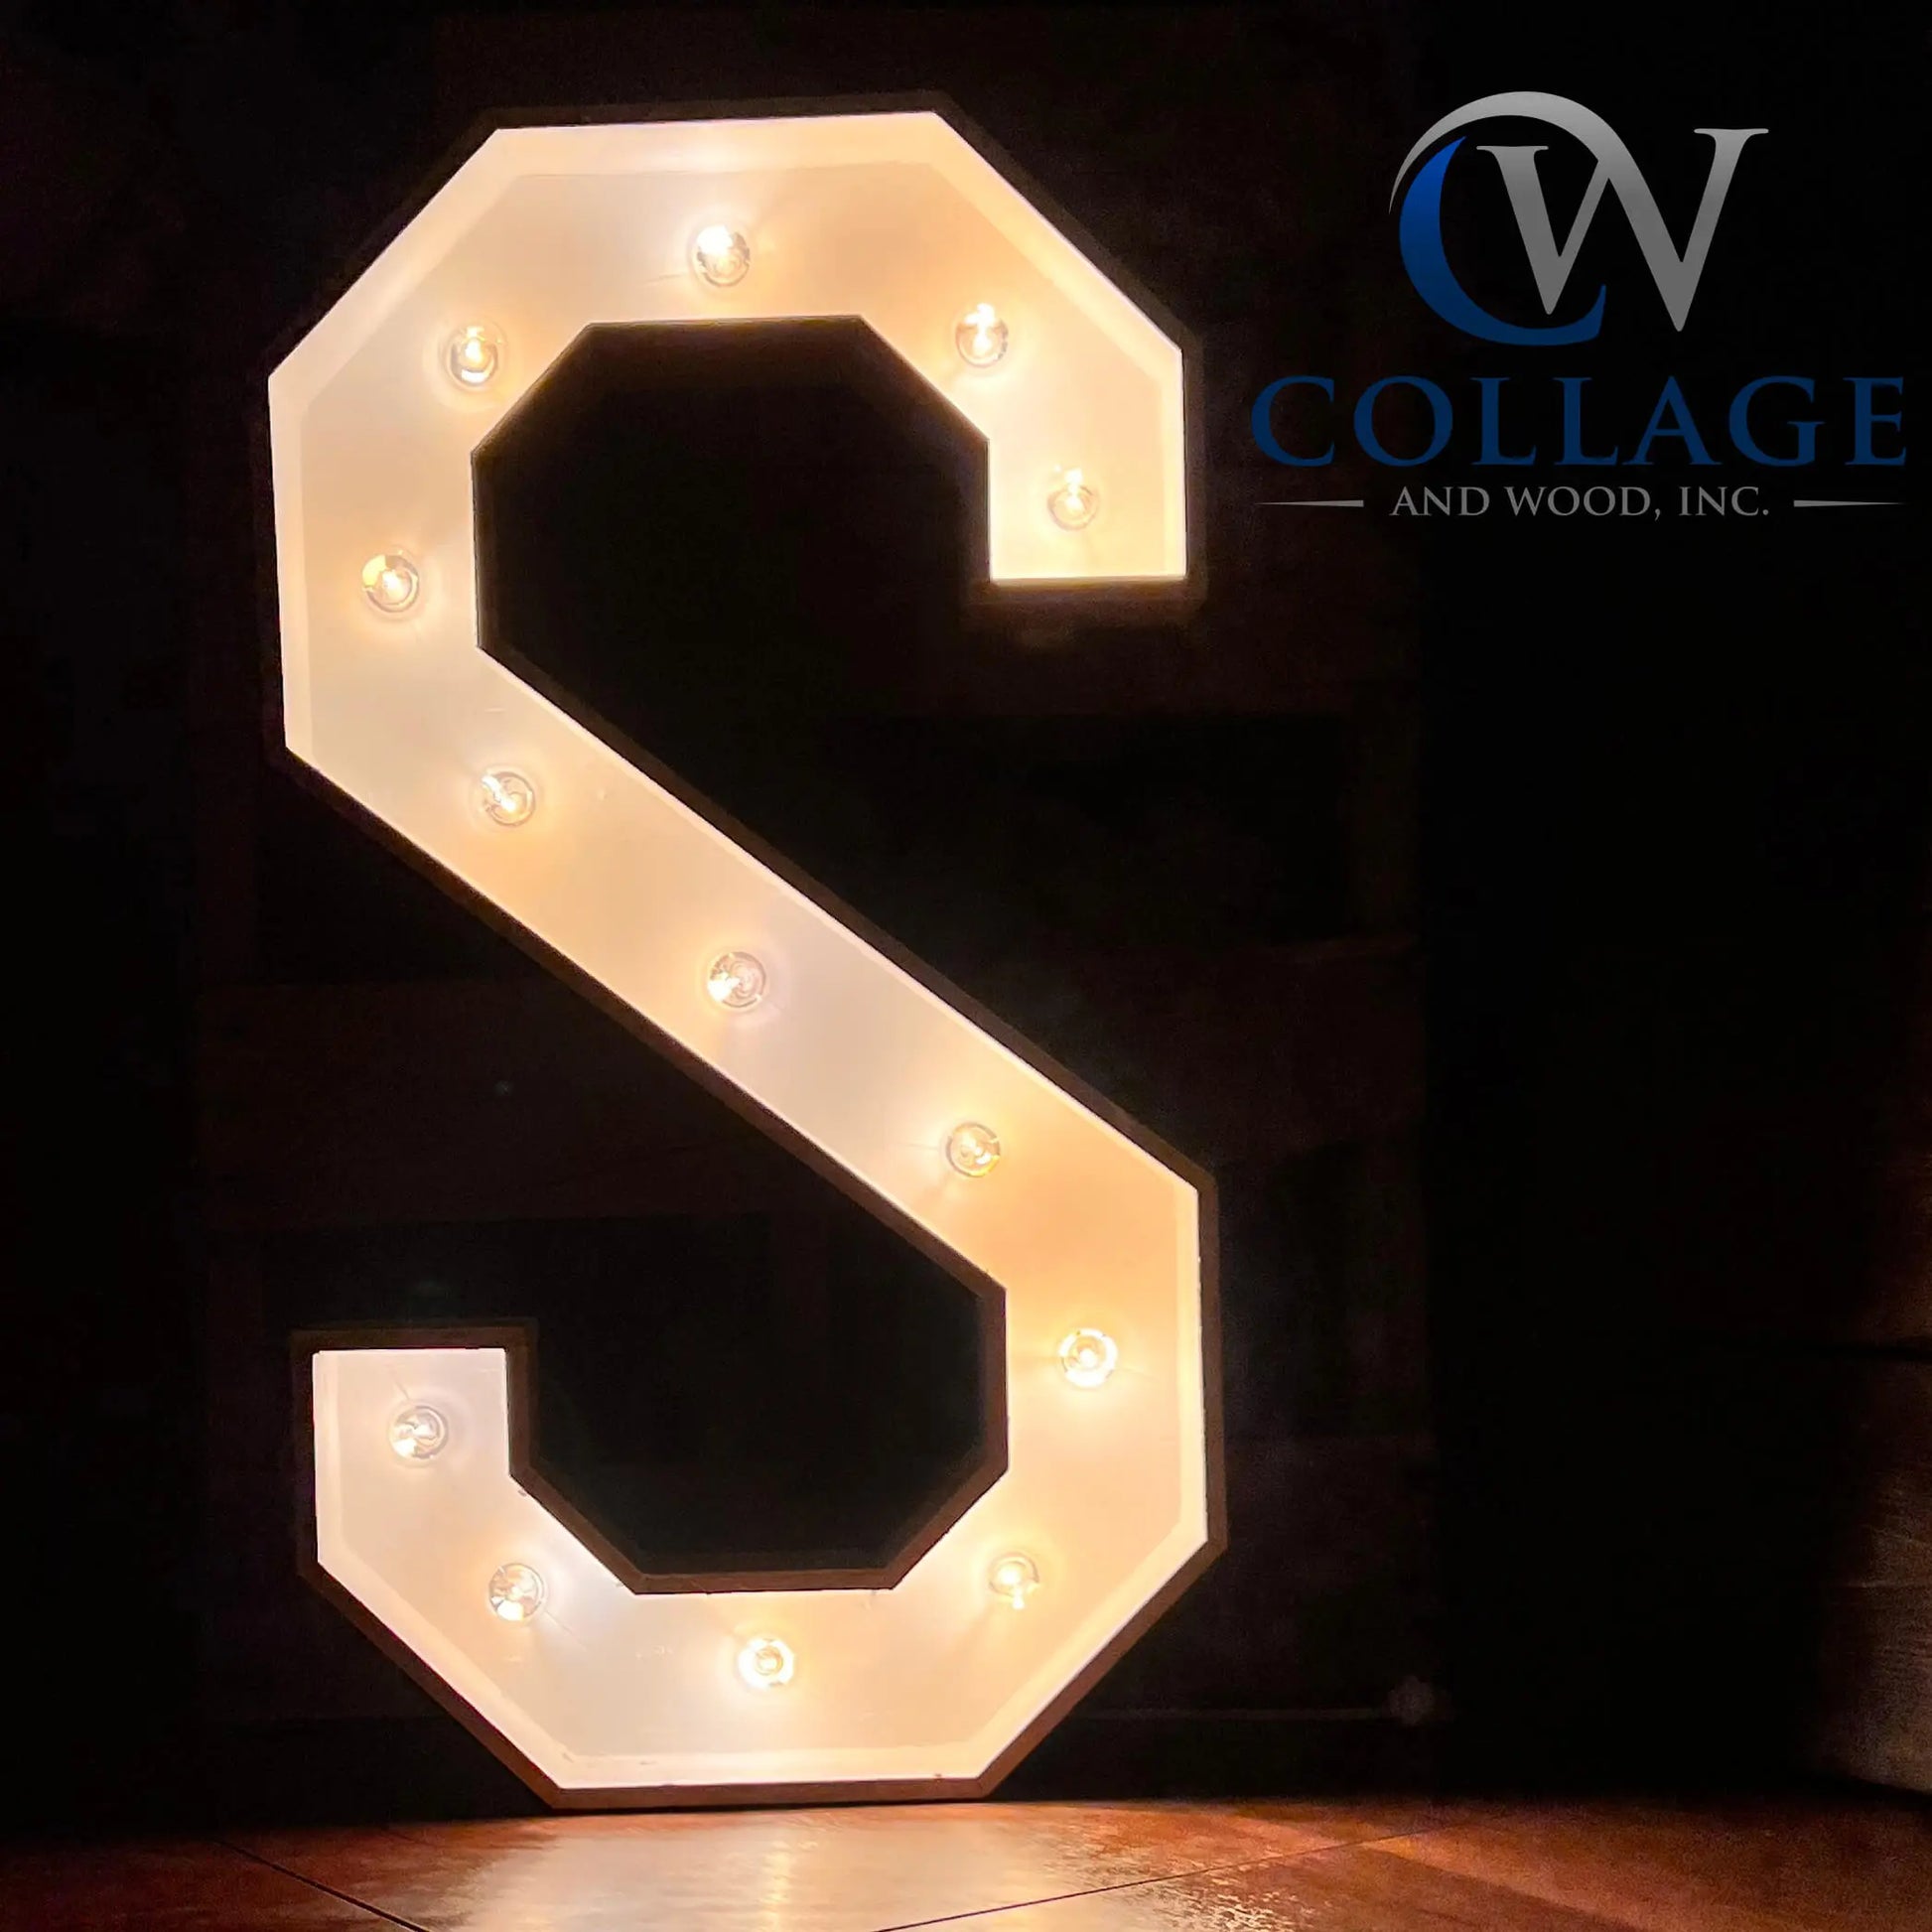 Stunning 3-foot tall wooden marquee letter S, elegantly dressed in white, sparking to life with vibrant battery-powered LED lights.